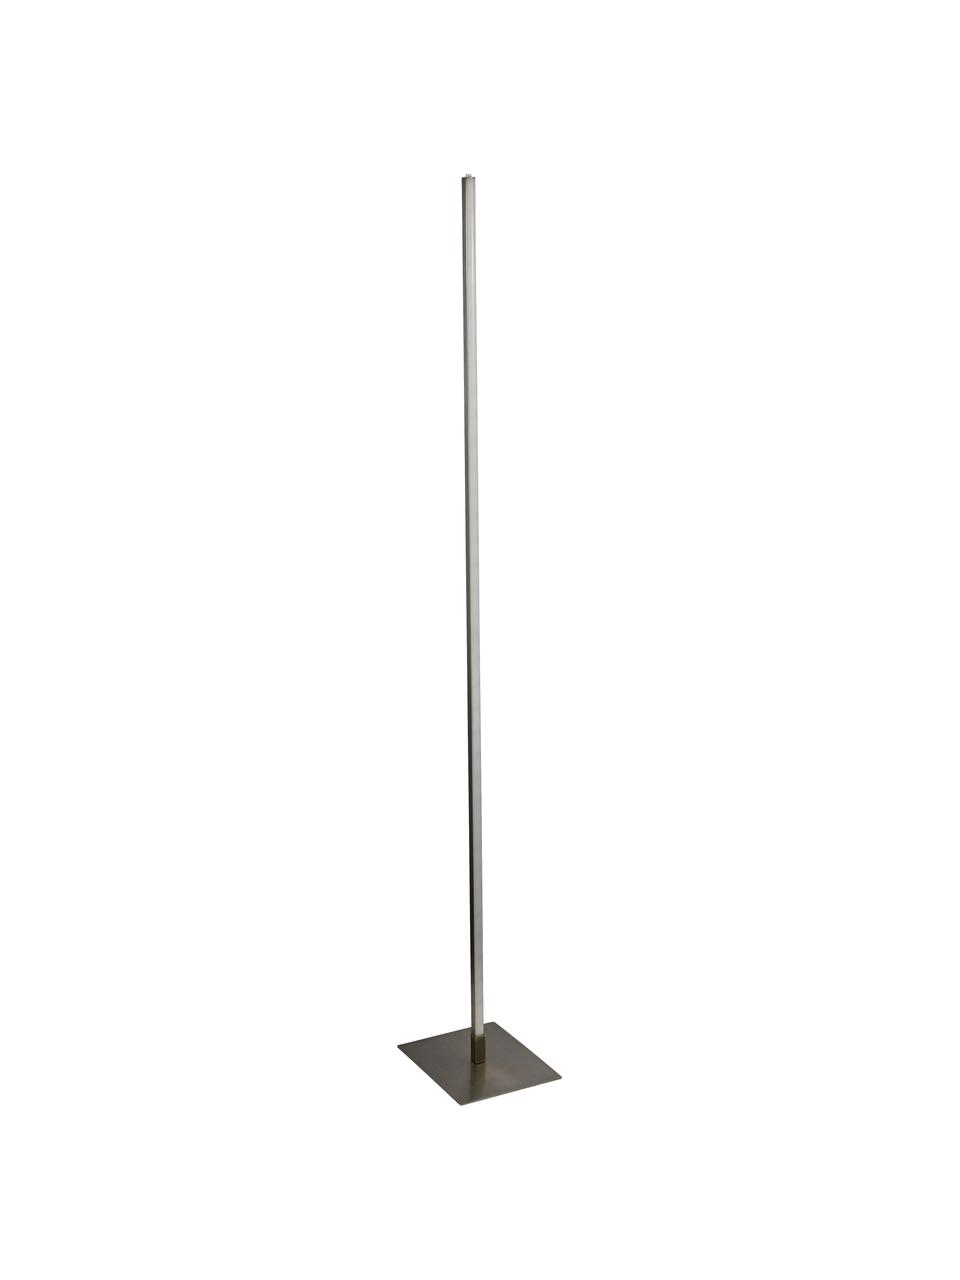 LED-Stehlampe Tribeca in Silber mit Farbwechsel-Funktion, Lampenschirm: Stahl, Aluminium, Lampenfuß: Stahl, Aluminium, Silberfarben, satiniert, 20 x 150 cm